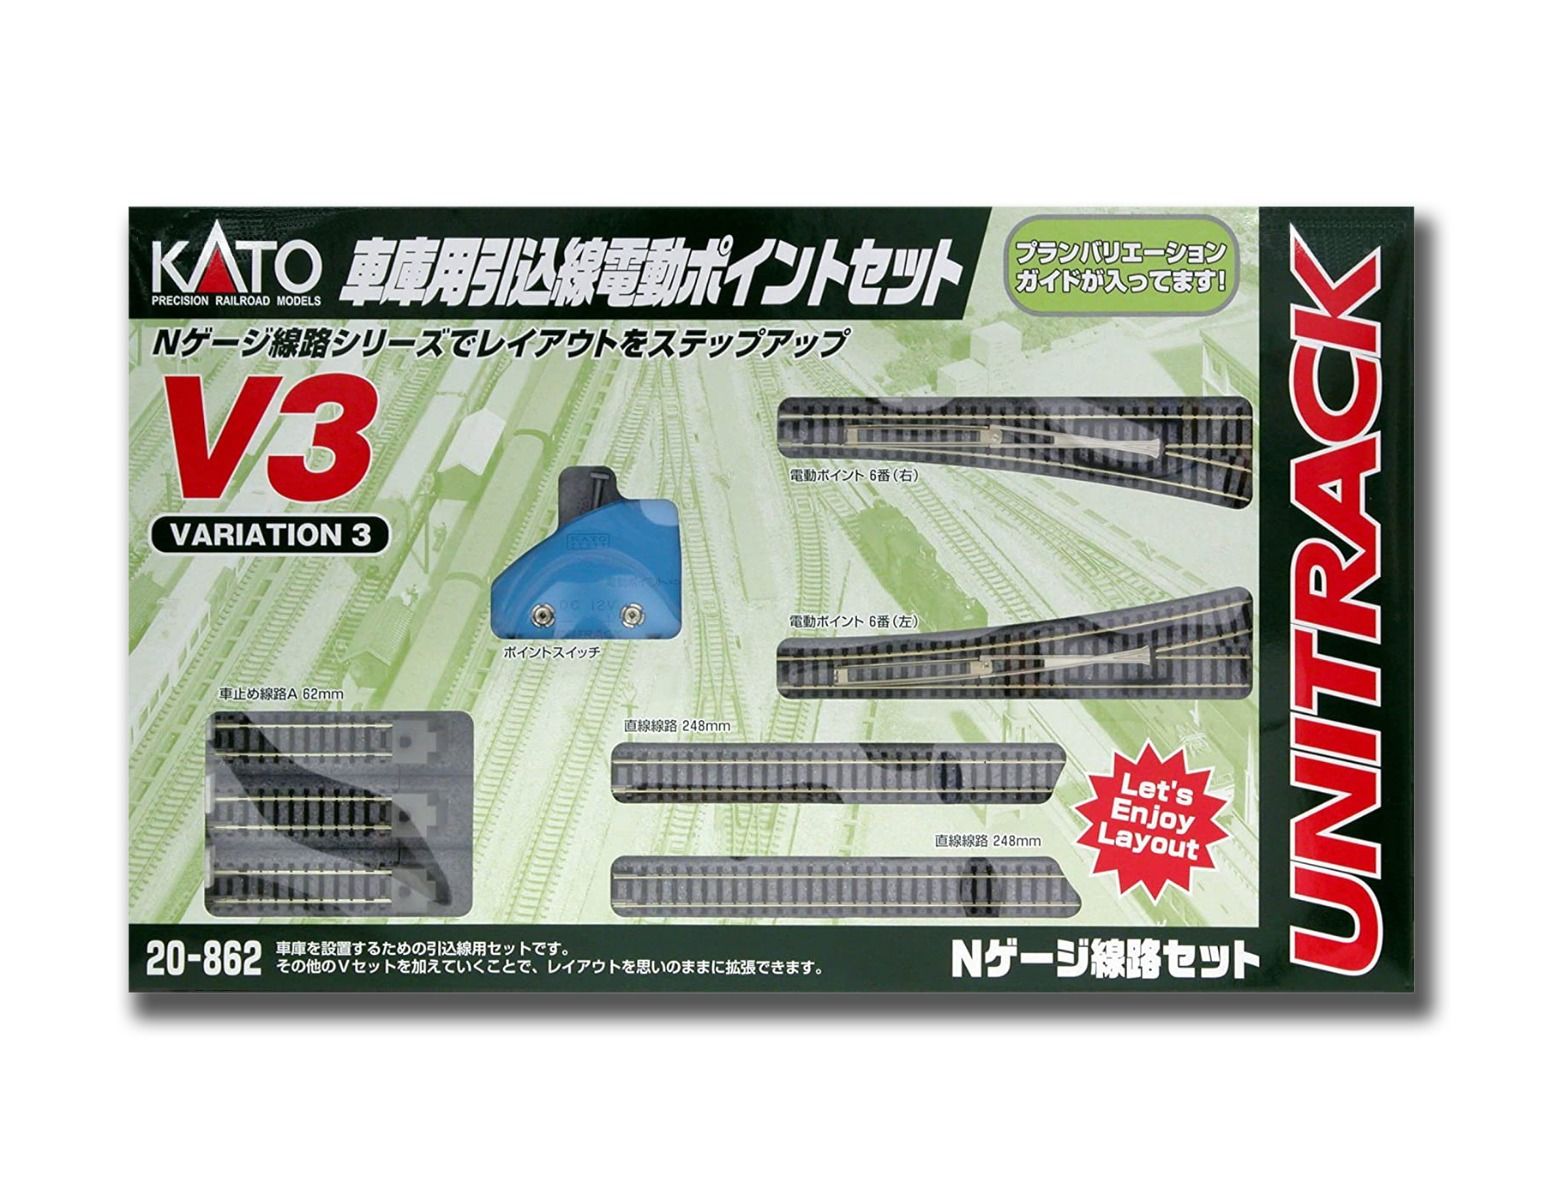 KATO N Scale V6 Endless Set Outer Double Wire 20-865 Railway Model A93557 for sale online 